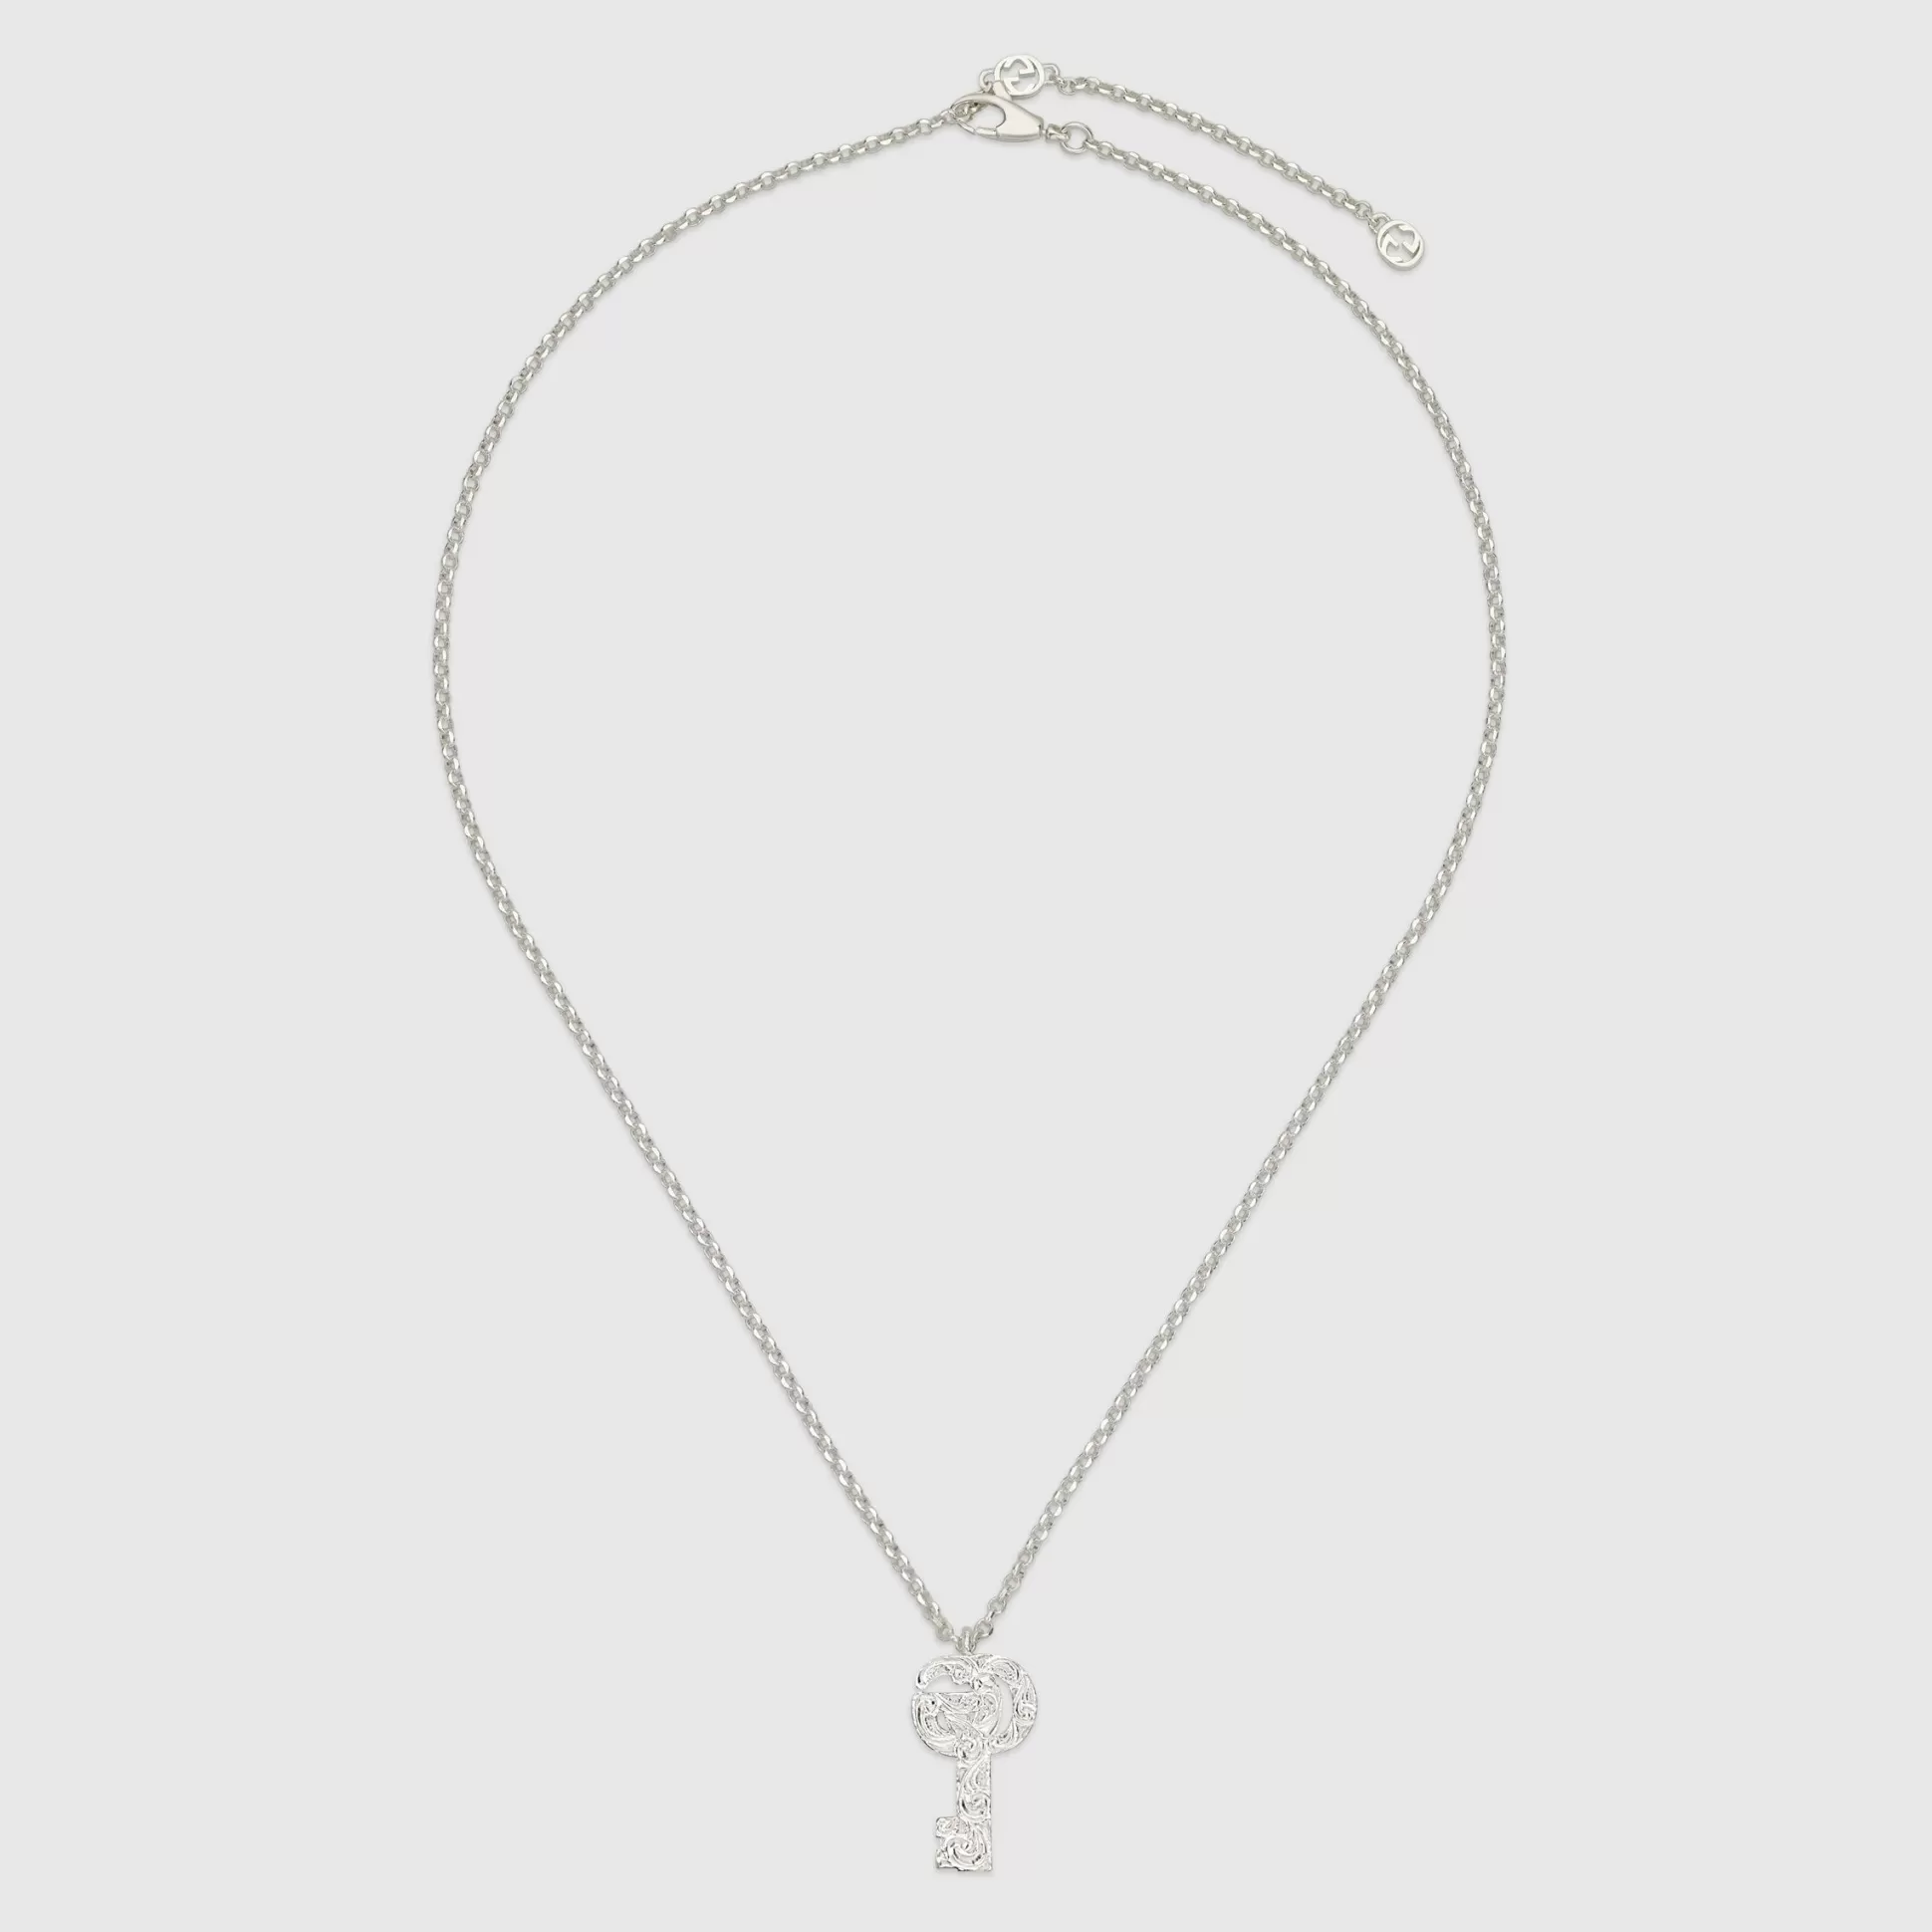 GUCCI Gg Marmont Key Charm Necklace- Necklaces